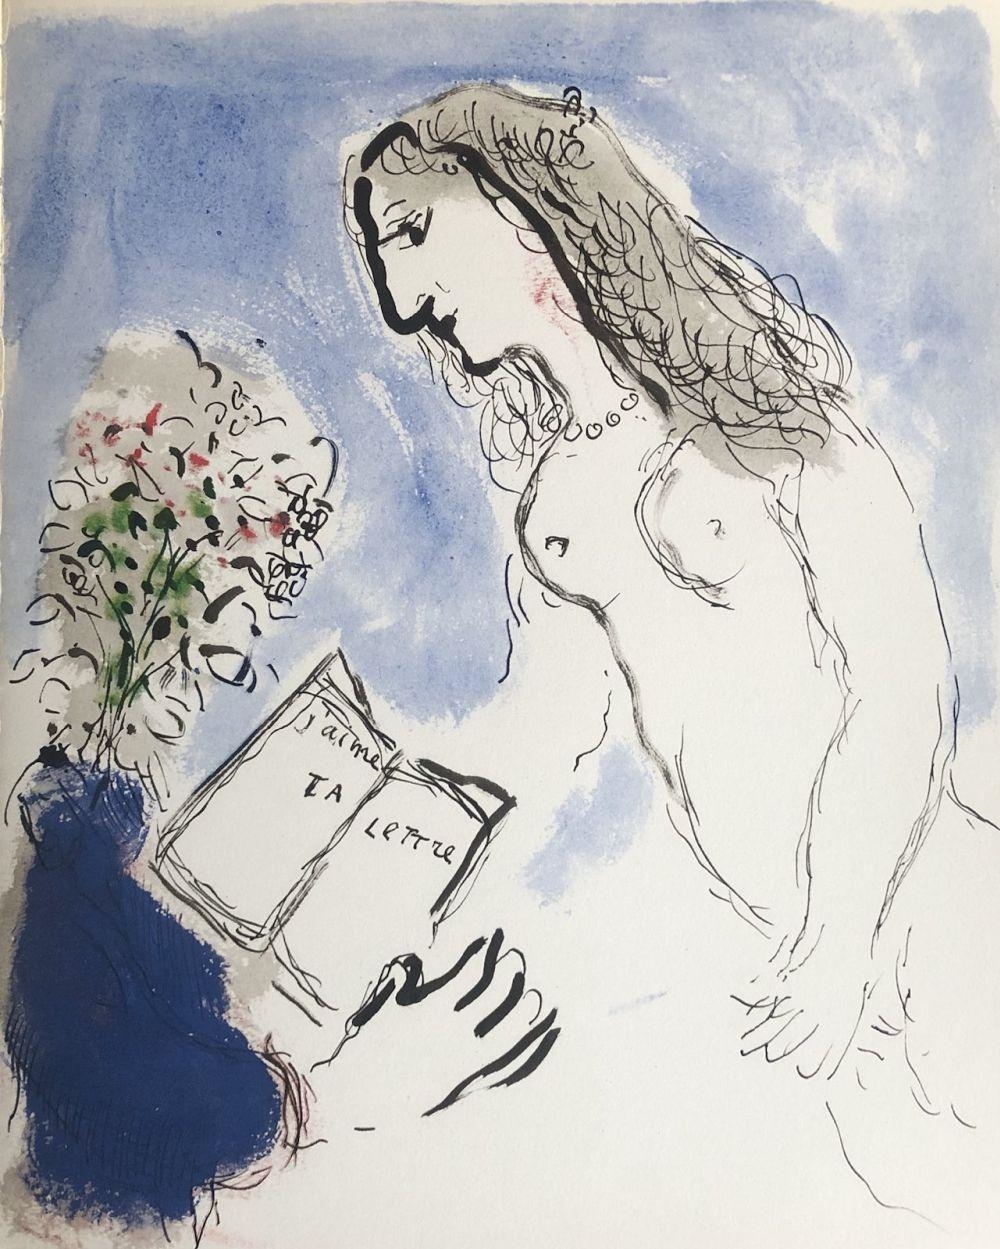 Lettres d'hivernage, 1973 - Marc Chagall